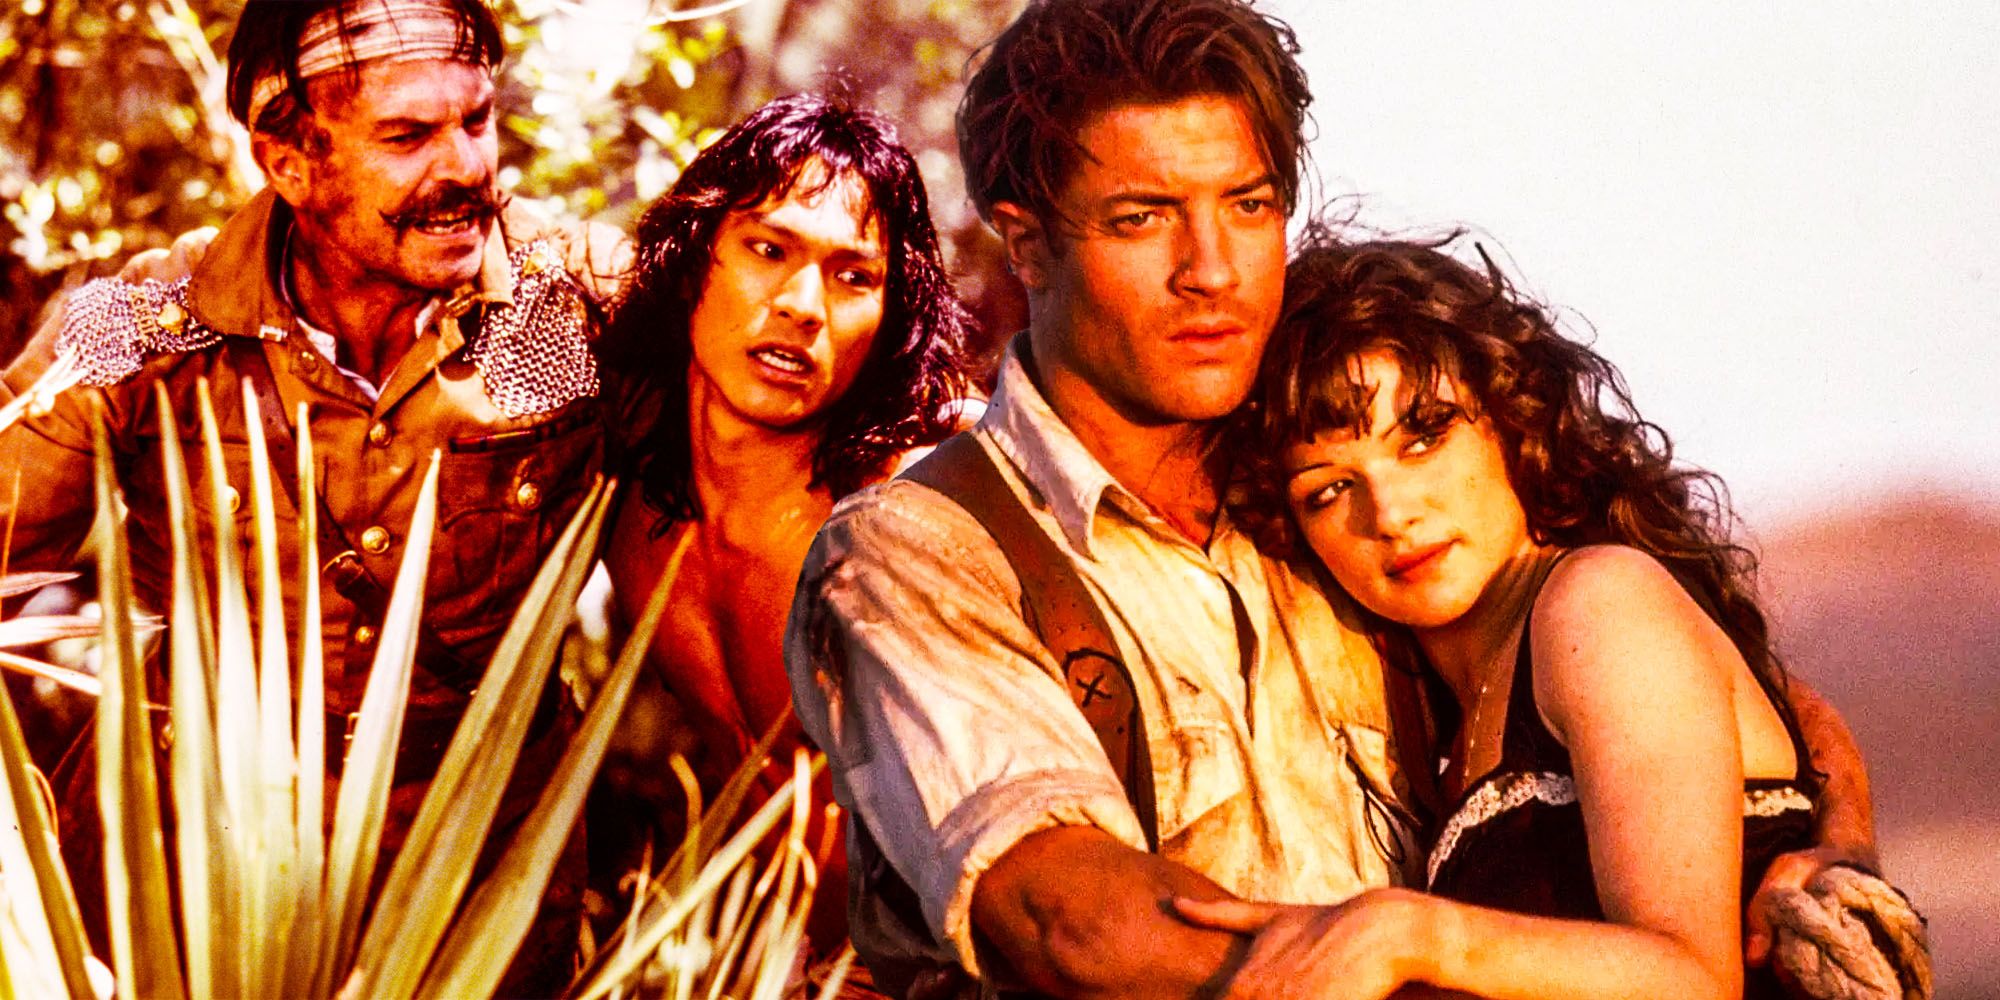 90s The mummy and The Jungle book same universe theory